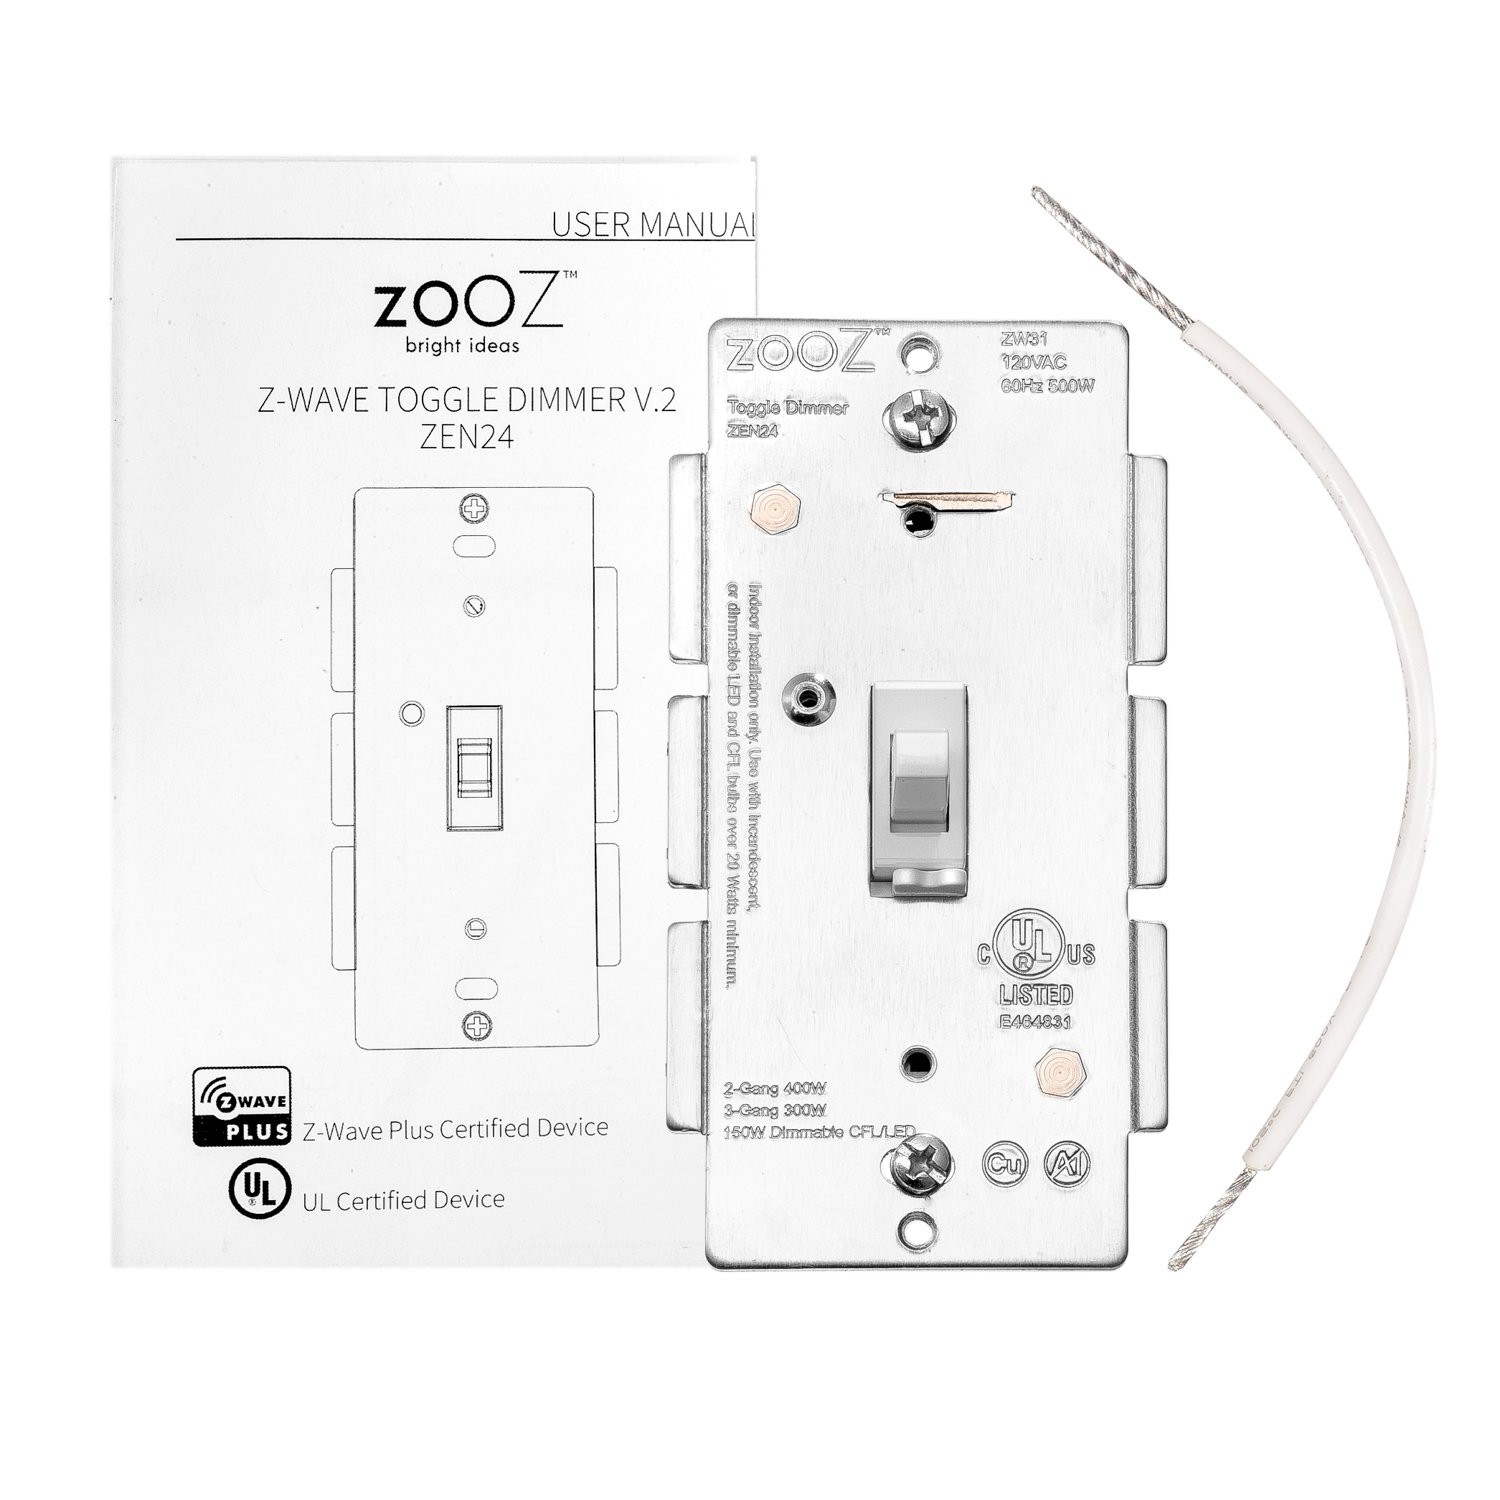 4 Way Dimmer Switch Wiring Diagram Zooz Z Wave Plus Dimmer toggle Switch Zen24 Ver 3 0 the Smartest Of 4 Way Dimmer Switch Wiring Diagram